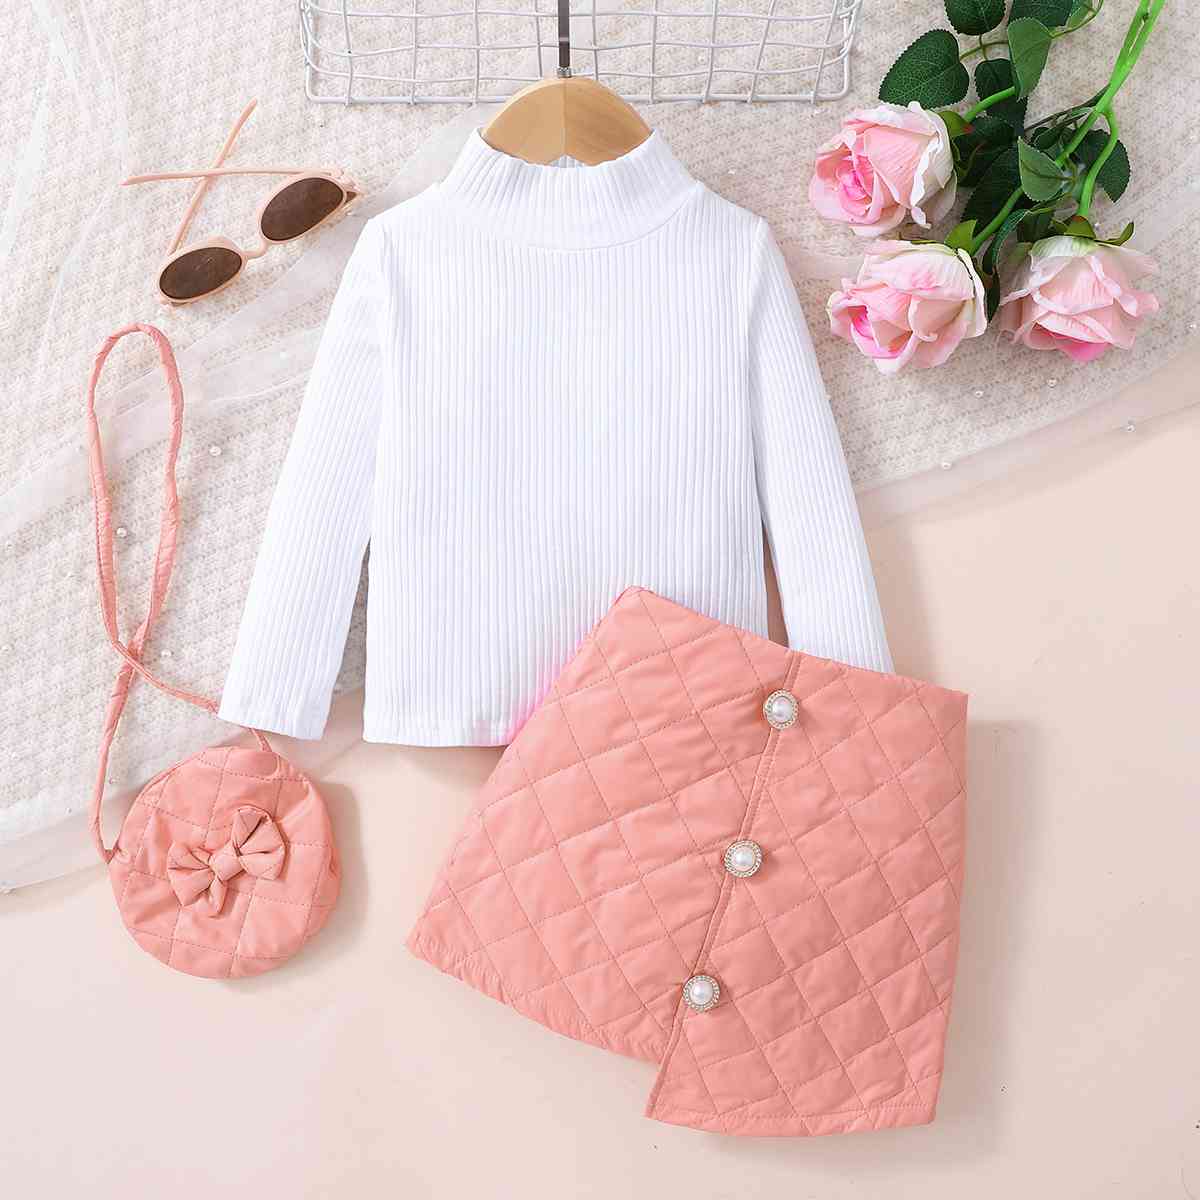 Girls Knit Top and Decorative Button Skirt Set with Bag